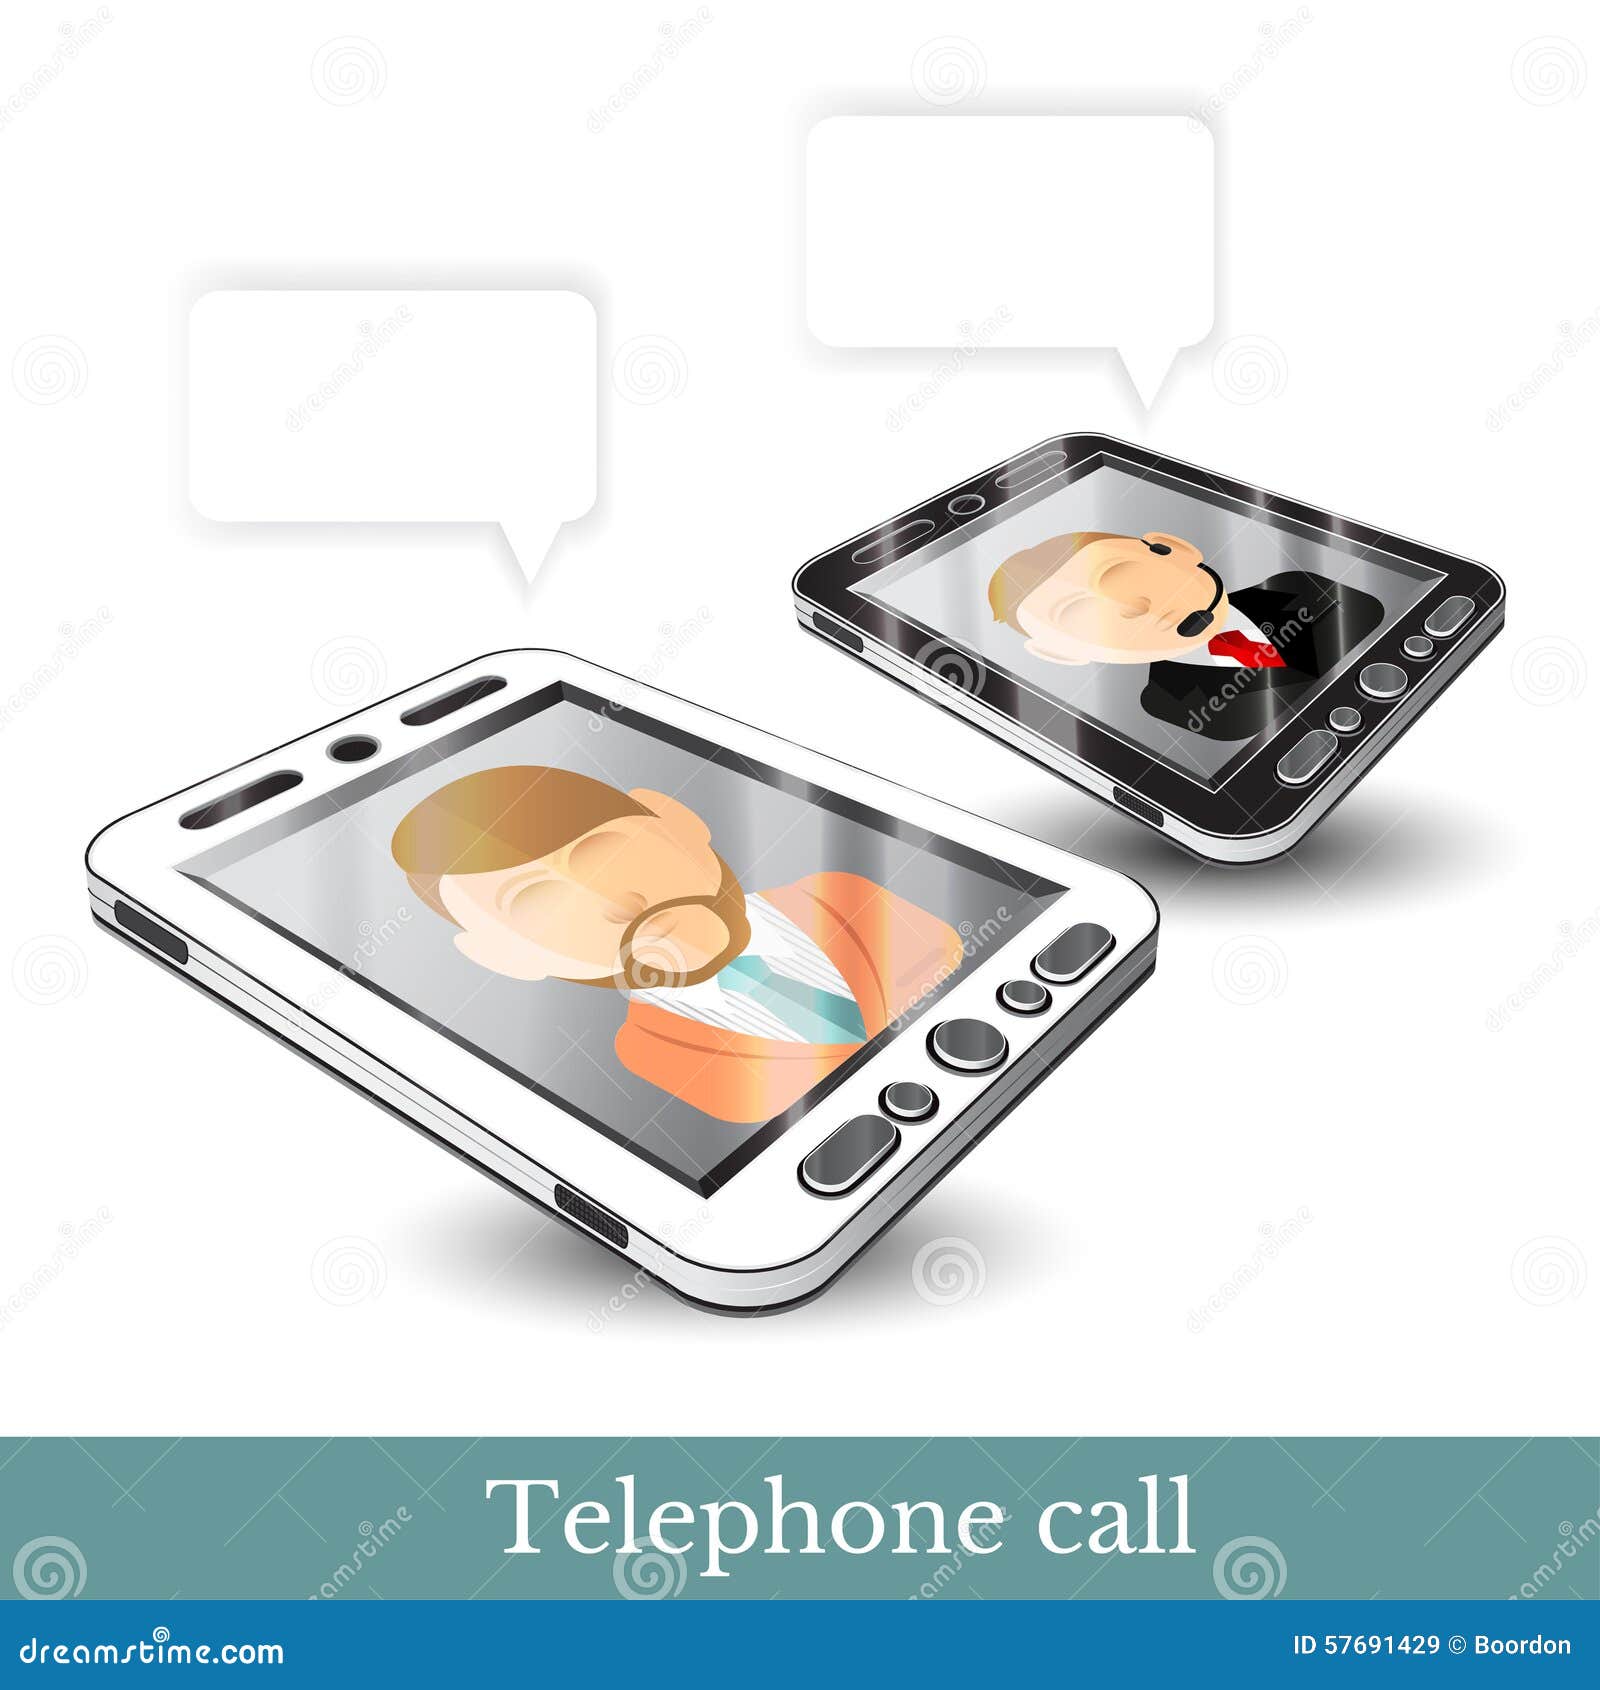 realistic two smartphone phone gadget black and white with contacting man